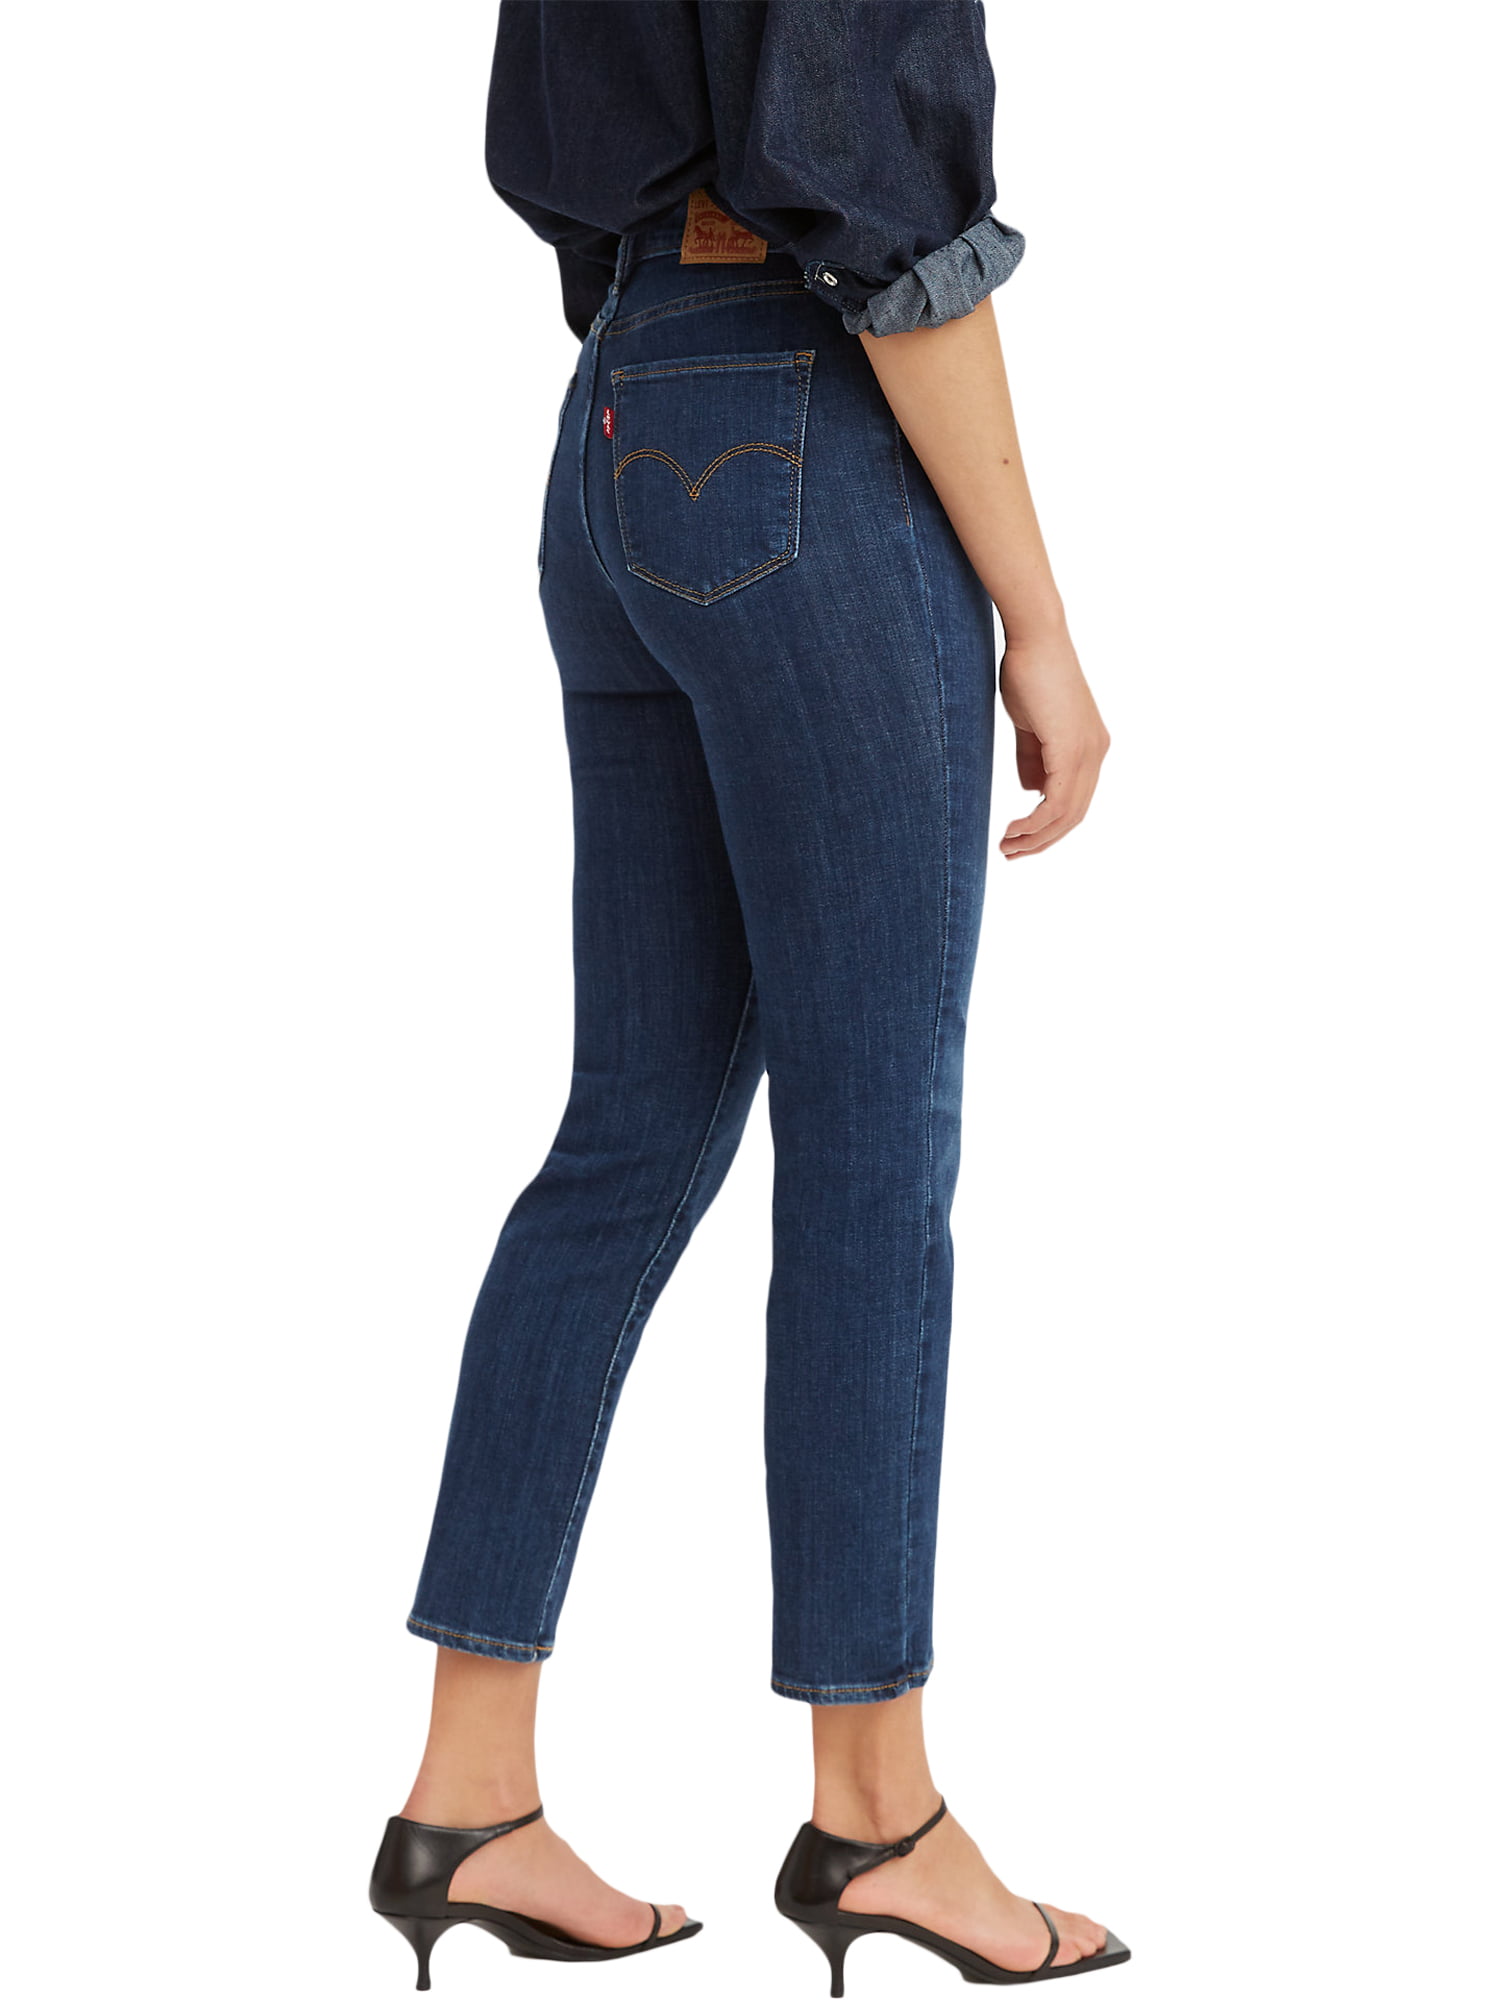 Levi's Original Women's 724 High-Rise Straight Cropped Jeans 